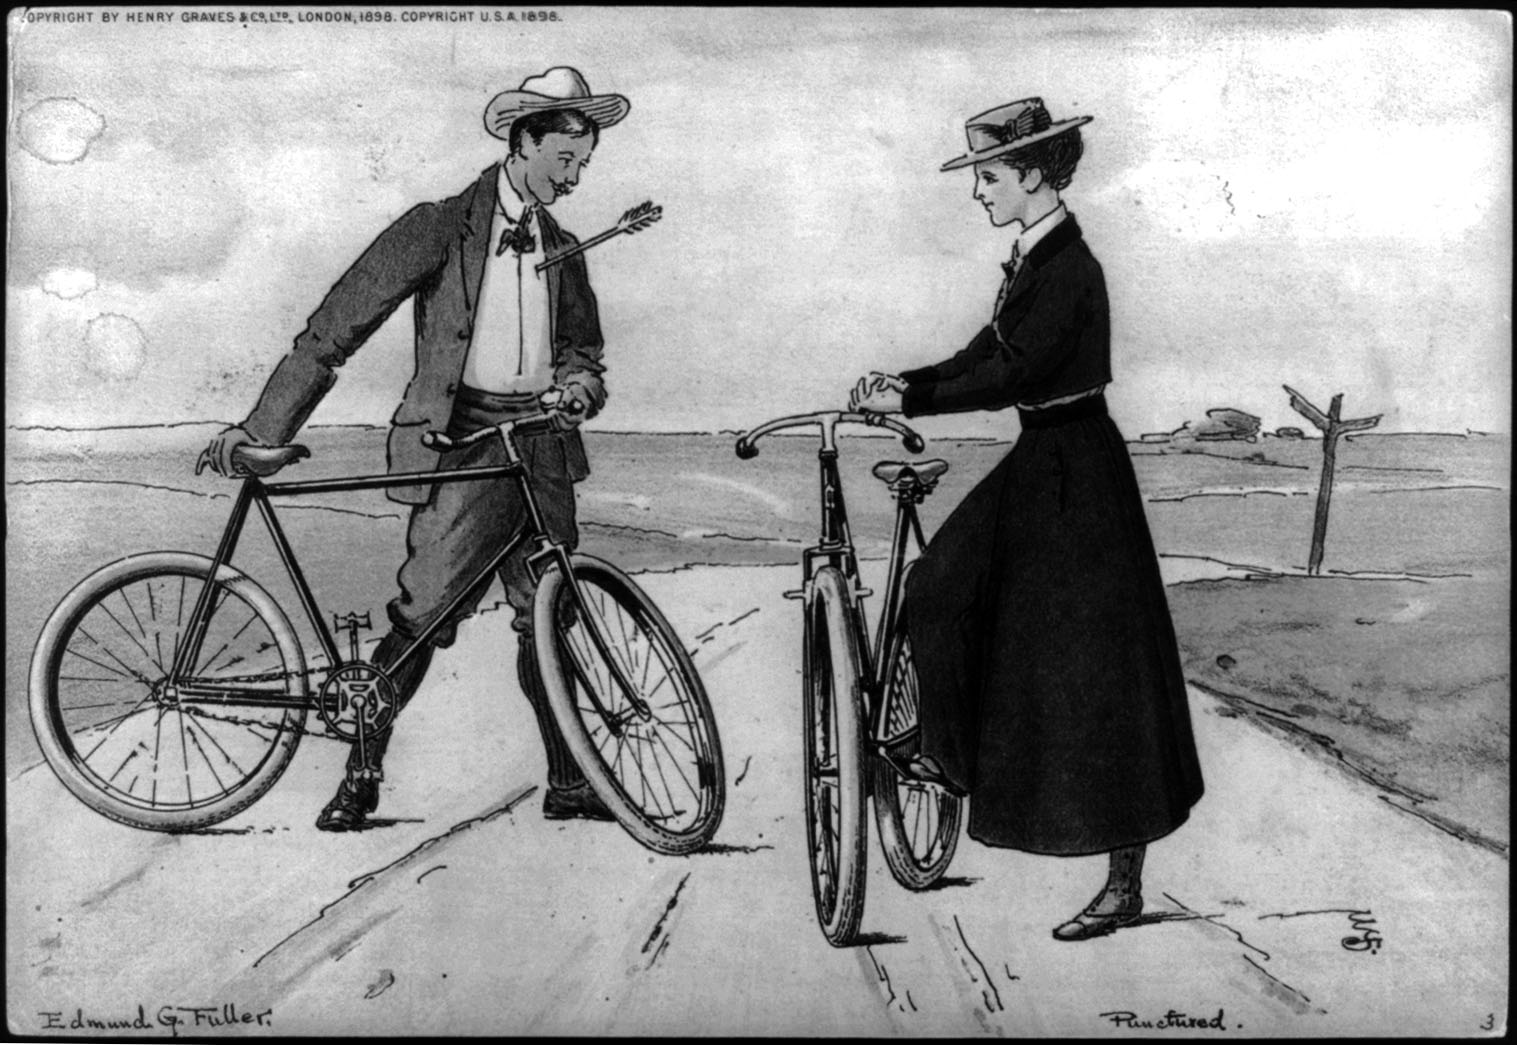 Punctured (Bicycle Courtship) by Edmund G. Fuller